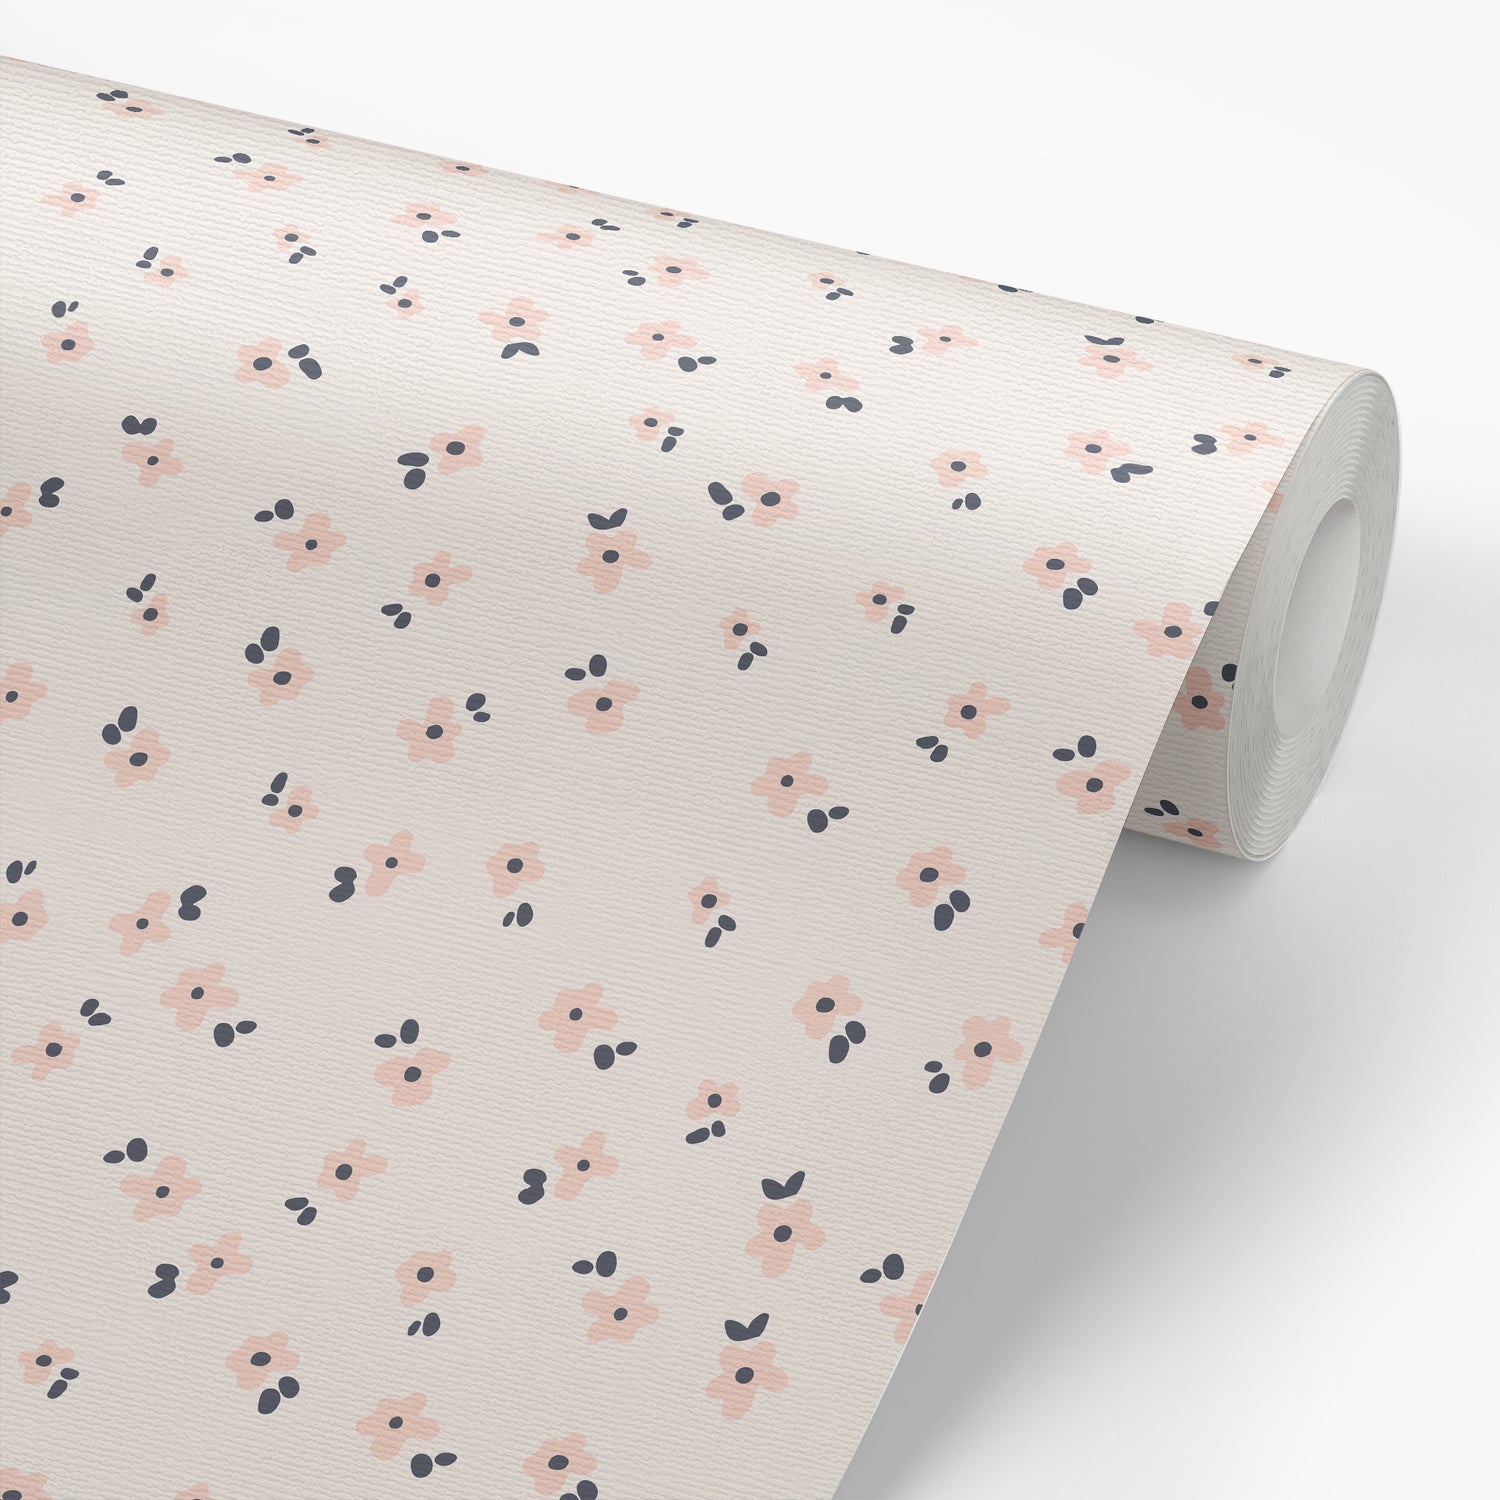 Our Snow in Summer removable peel and stick wallpaper in Blush shown on a roll of wallpaper.